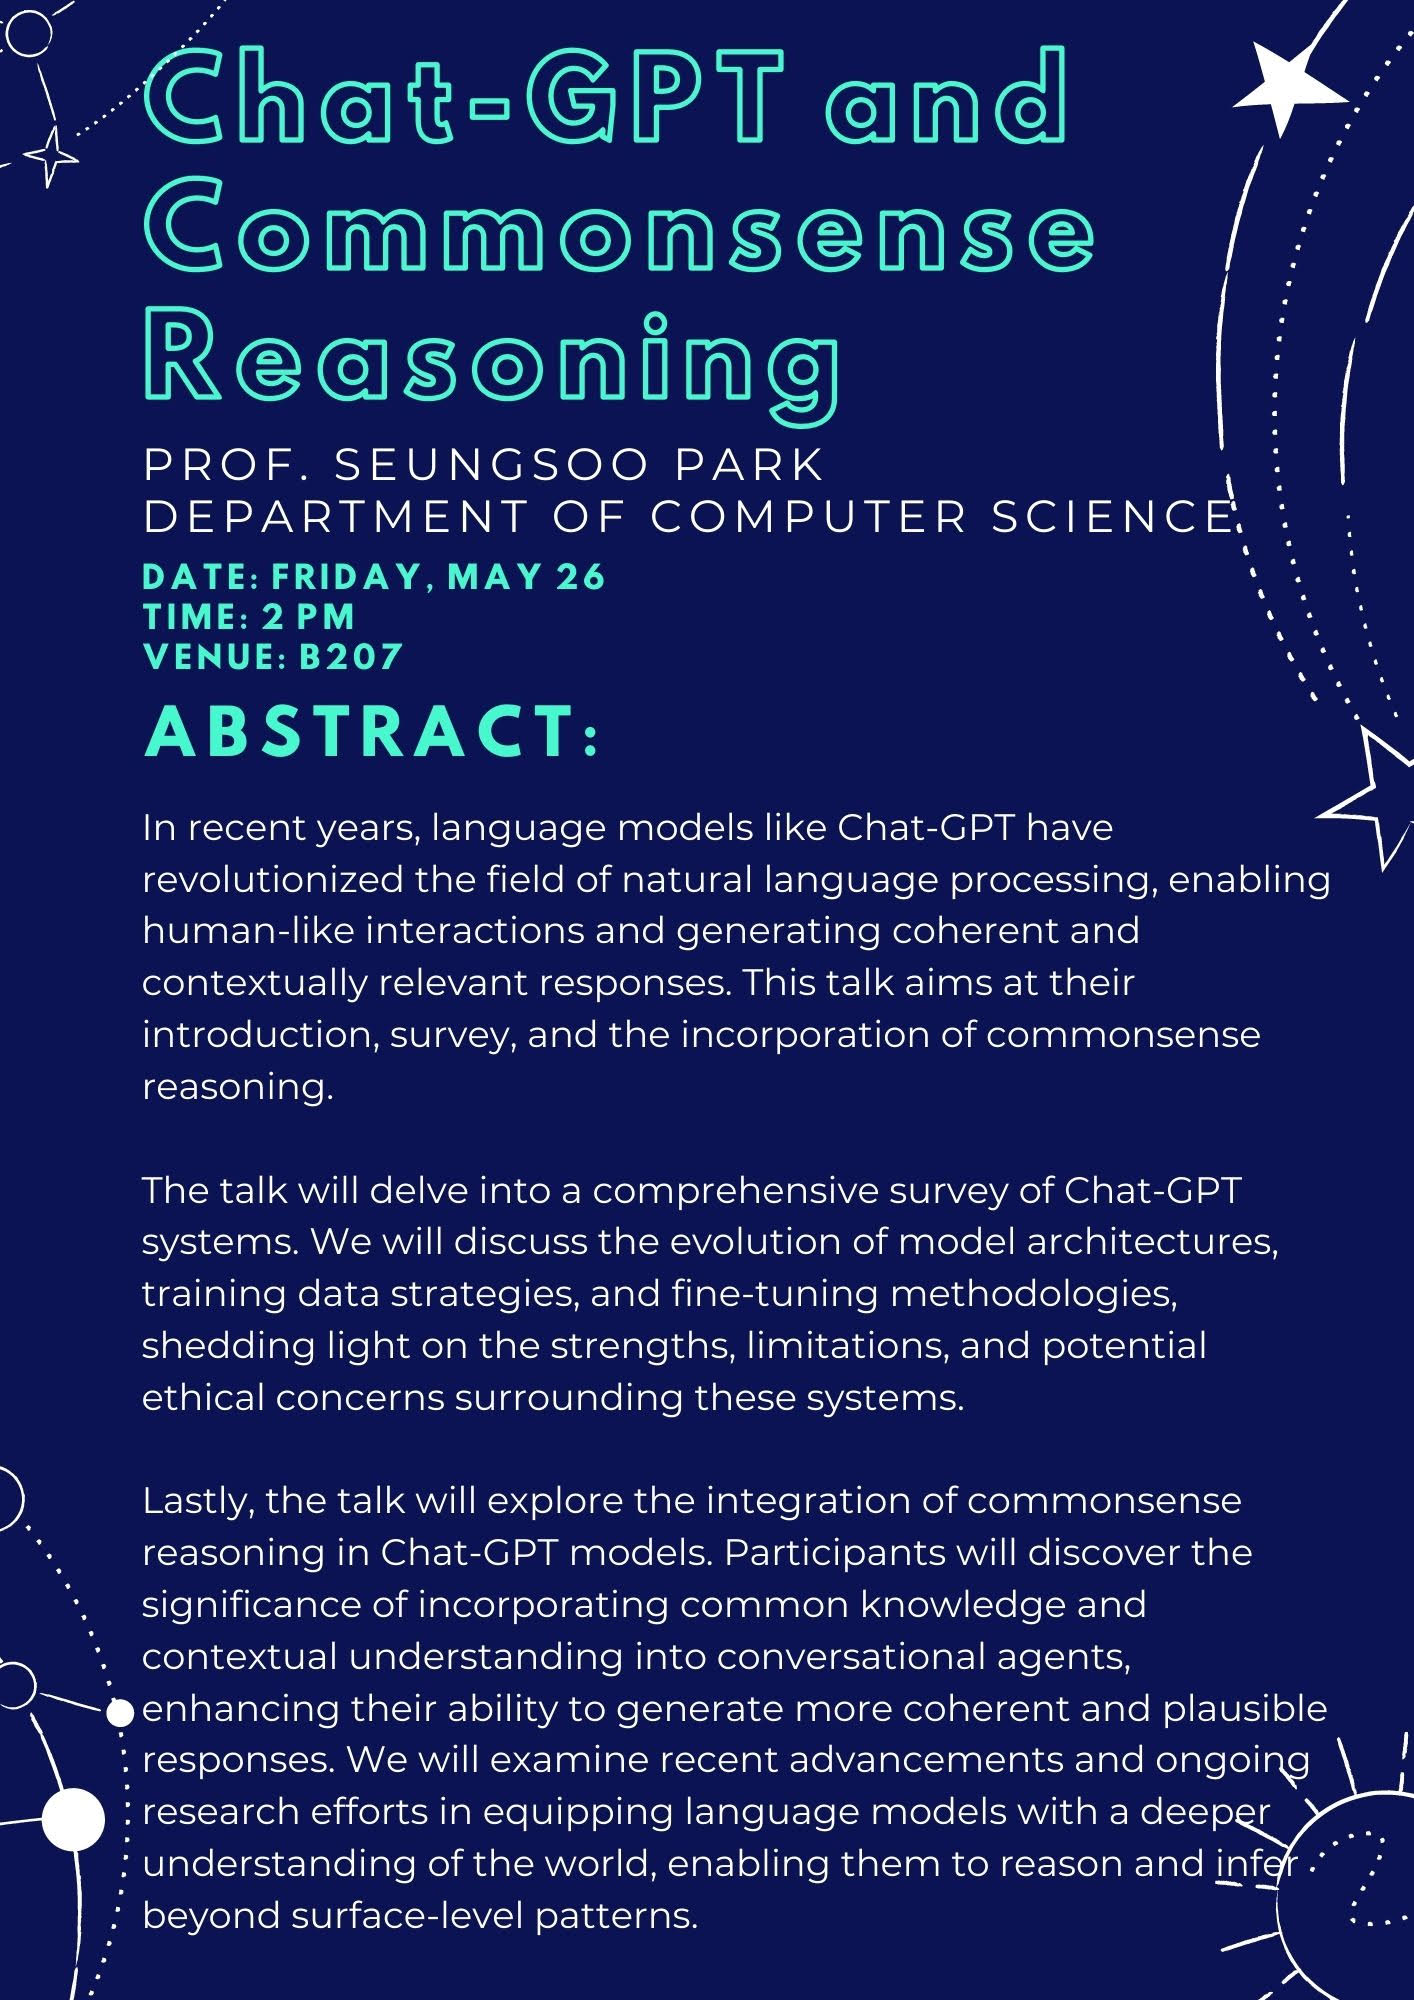 Chat-GPT and Commonsense Reasoning PROF. SEUNGSOO PARK DEPARTMENT OF COMPUTER SCIENCE. DATE: FRIDAY, MAY26. TIME: 2PM. VENUE: B207. ABSTRACT: In recent years, language models like Chat-GPT have revolutionized the field of natural language proessing, enabling human-like interactions and generating coherent and contextually relevant responses. This talk aims at their introduction, survey, and the incorporation of commonsense reasoning. The talk will delve into a comprehensive survey of Chat-GPT systems. We will discuss the evolution of model architectures, training data strategies, and fine-tuning methodologies, shedding light on the strengths, limitations, and potential ethical concerns surrounding these systems. Lastly, the talk will explore the integration of commonsense reasoning in Chat-GDT models. Participants will discover the significance of incorporating common knowledge and contextual understanding into conversational agents, enhancing their ability to generate more coherent and plausible responses. We will examine recent advancements and ongoing research efforts in equipping language models with a deeper understanding of the world, enabling them to reason and infer beyond surface-level patterns.